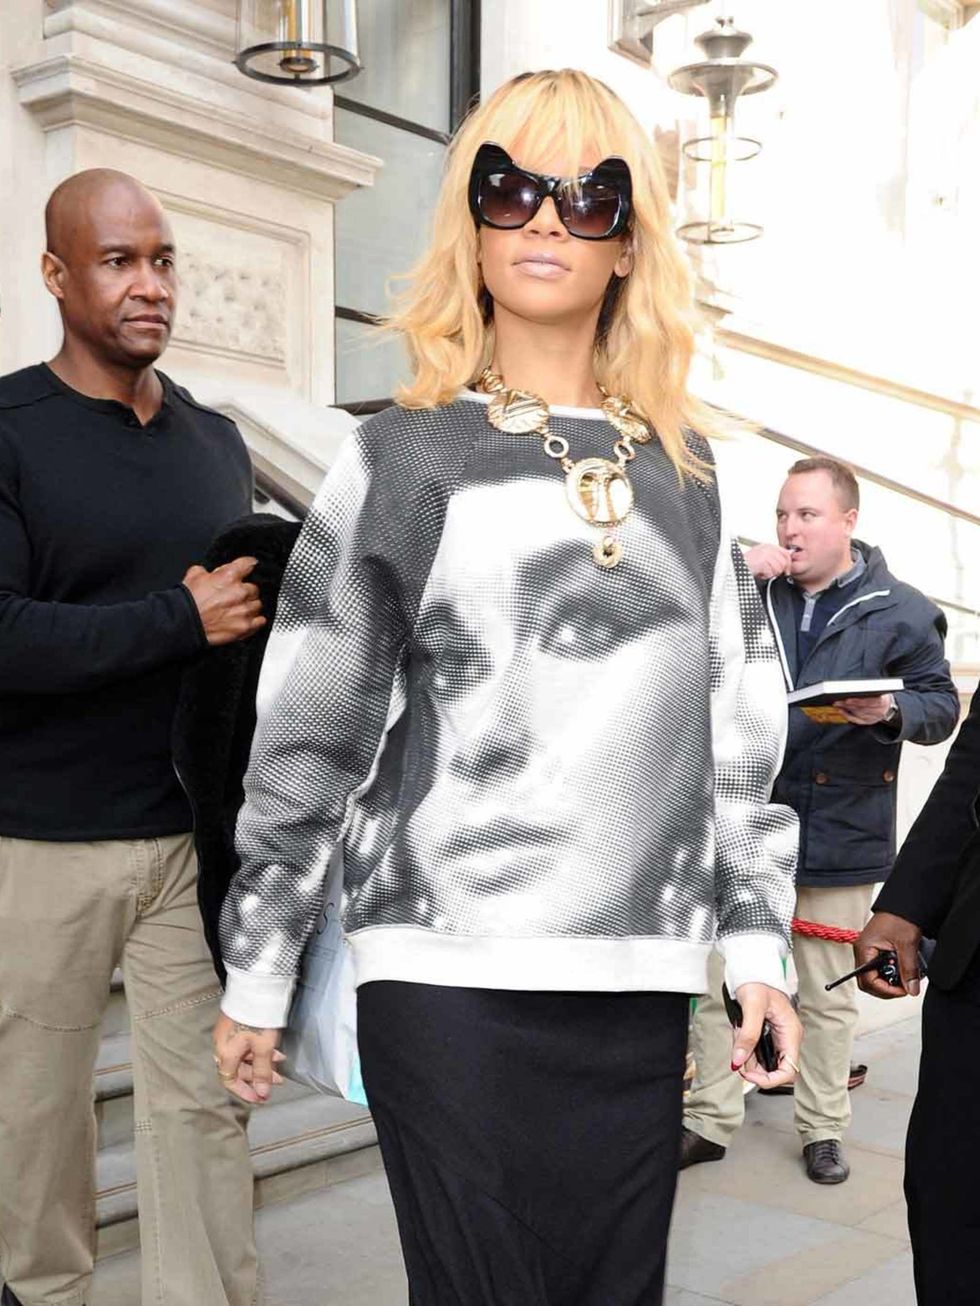 <p><a href="http://www.elleuk.com/star-style/celebrity-style-files/rihanna">Rihanna</a> wearing a Cleopatra print sweater from the <a href="http://www.elleuk.com/catwalk/designer-a-z/unique/spring-summer-2012/collection">Topshop Unique spring summer 12 co